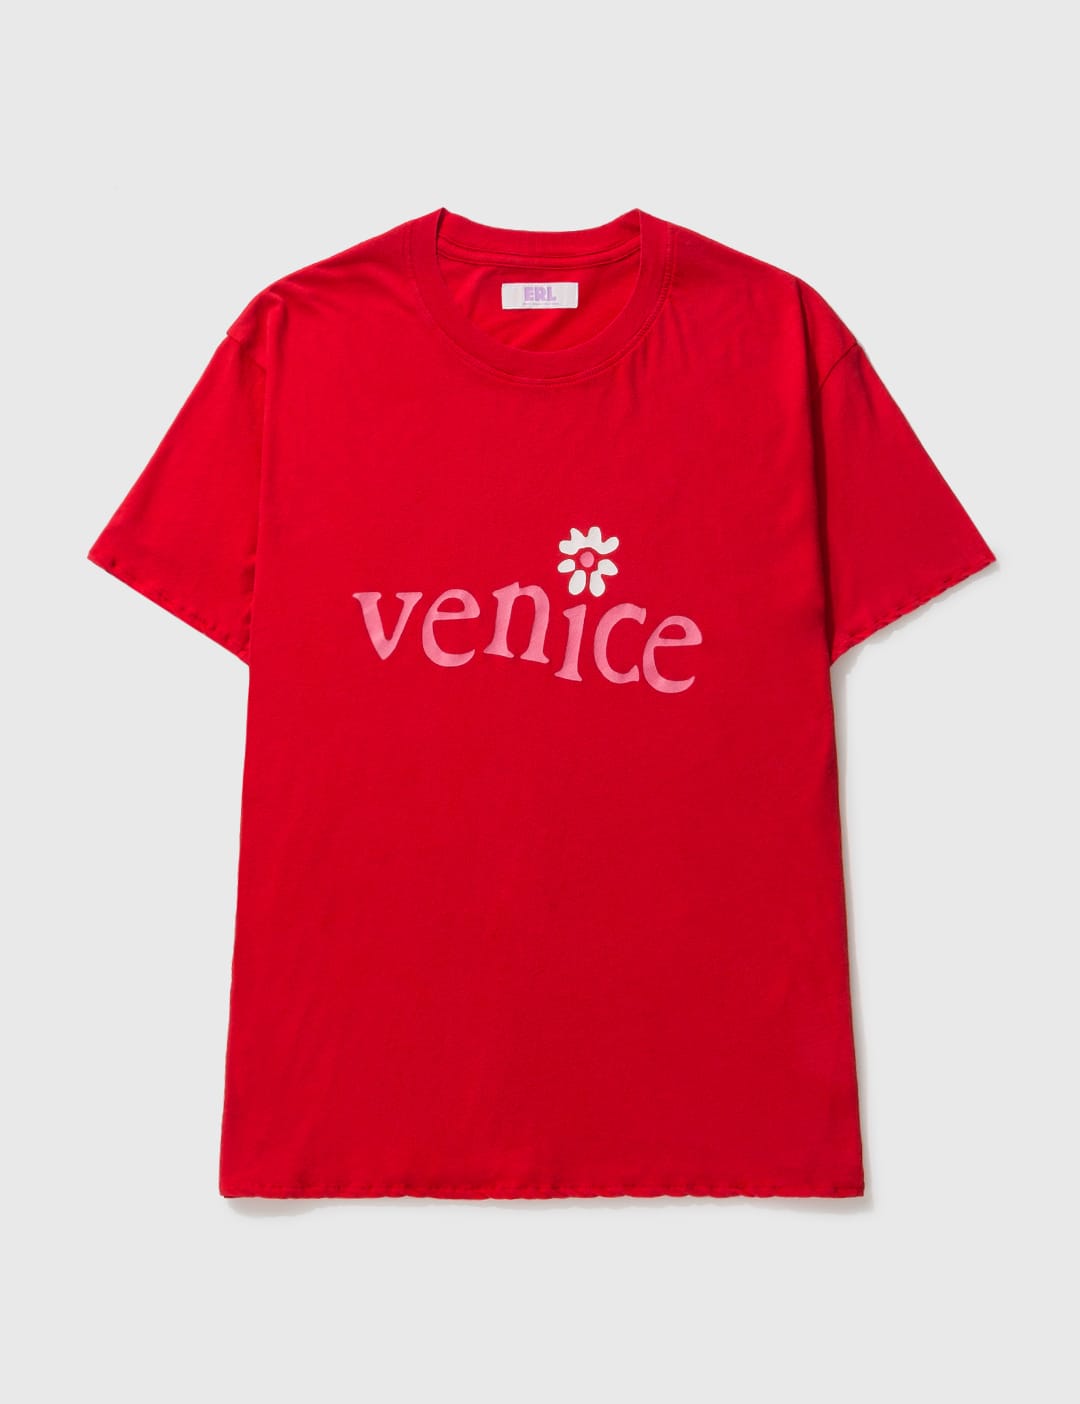 ERL - Venice T-shirt | HBX - Globally Curated Fashion and Lifestyle